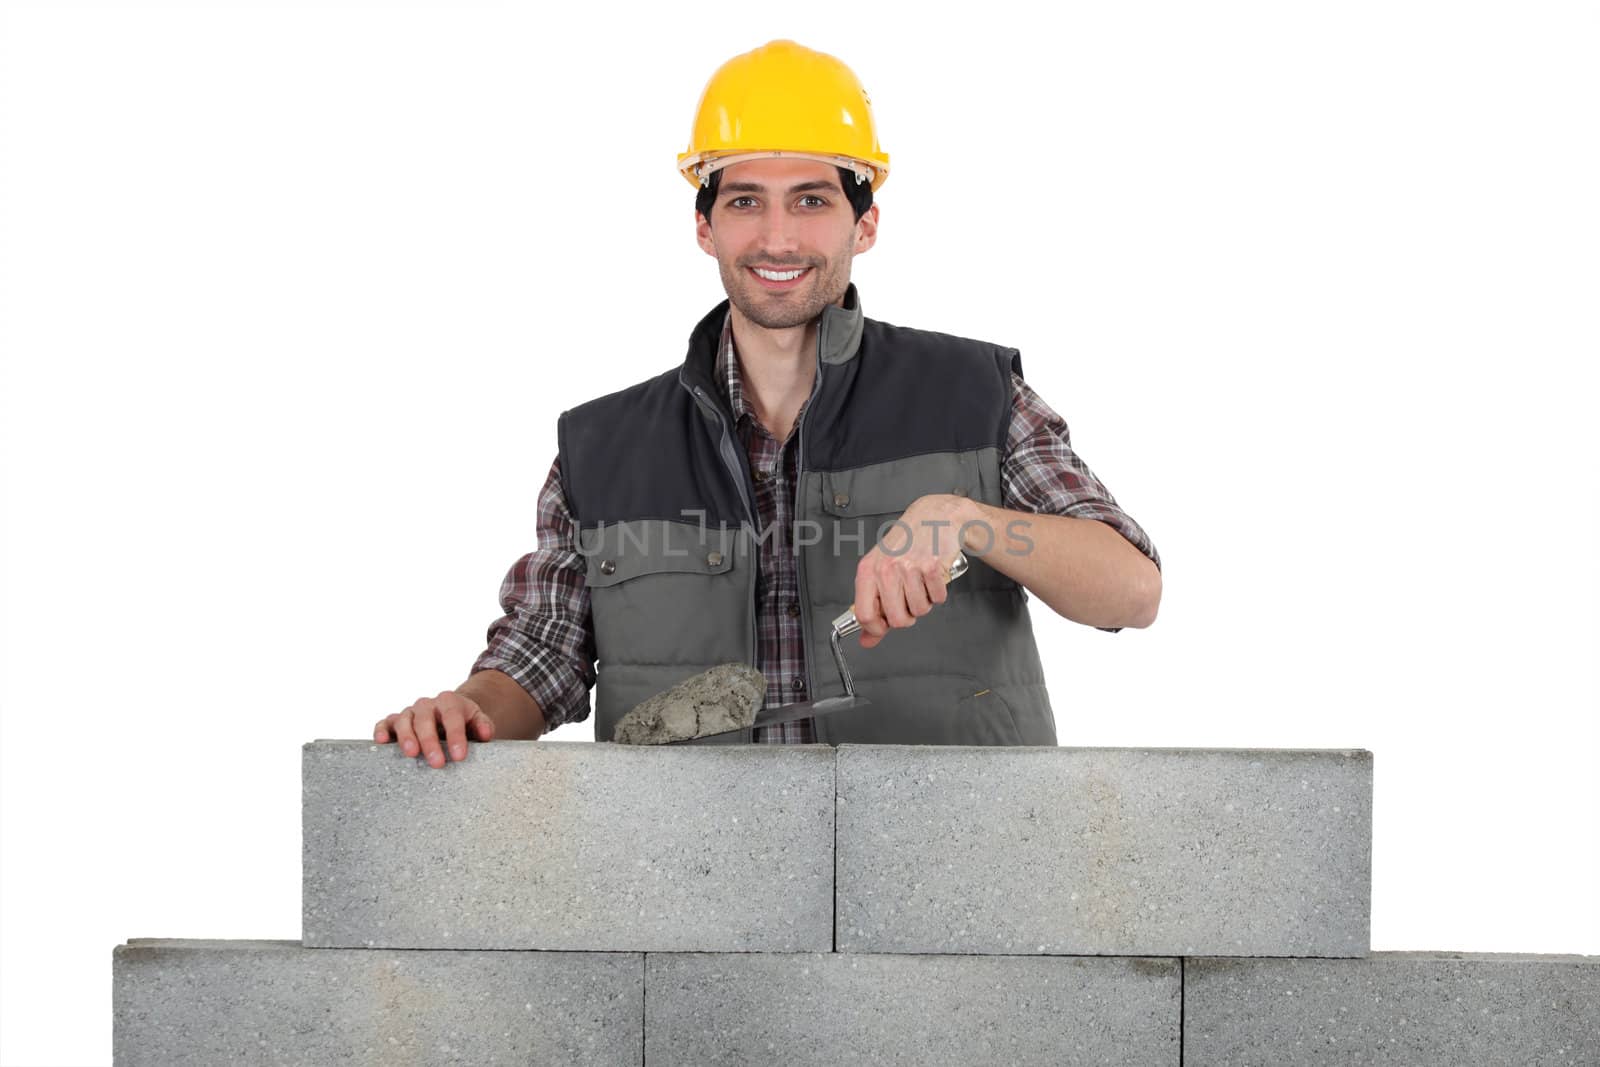 Bricklayer building a wall by phovoir